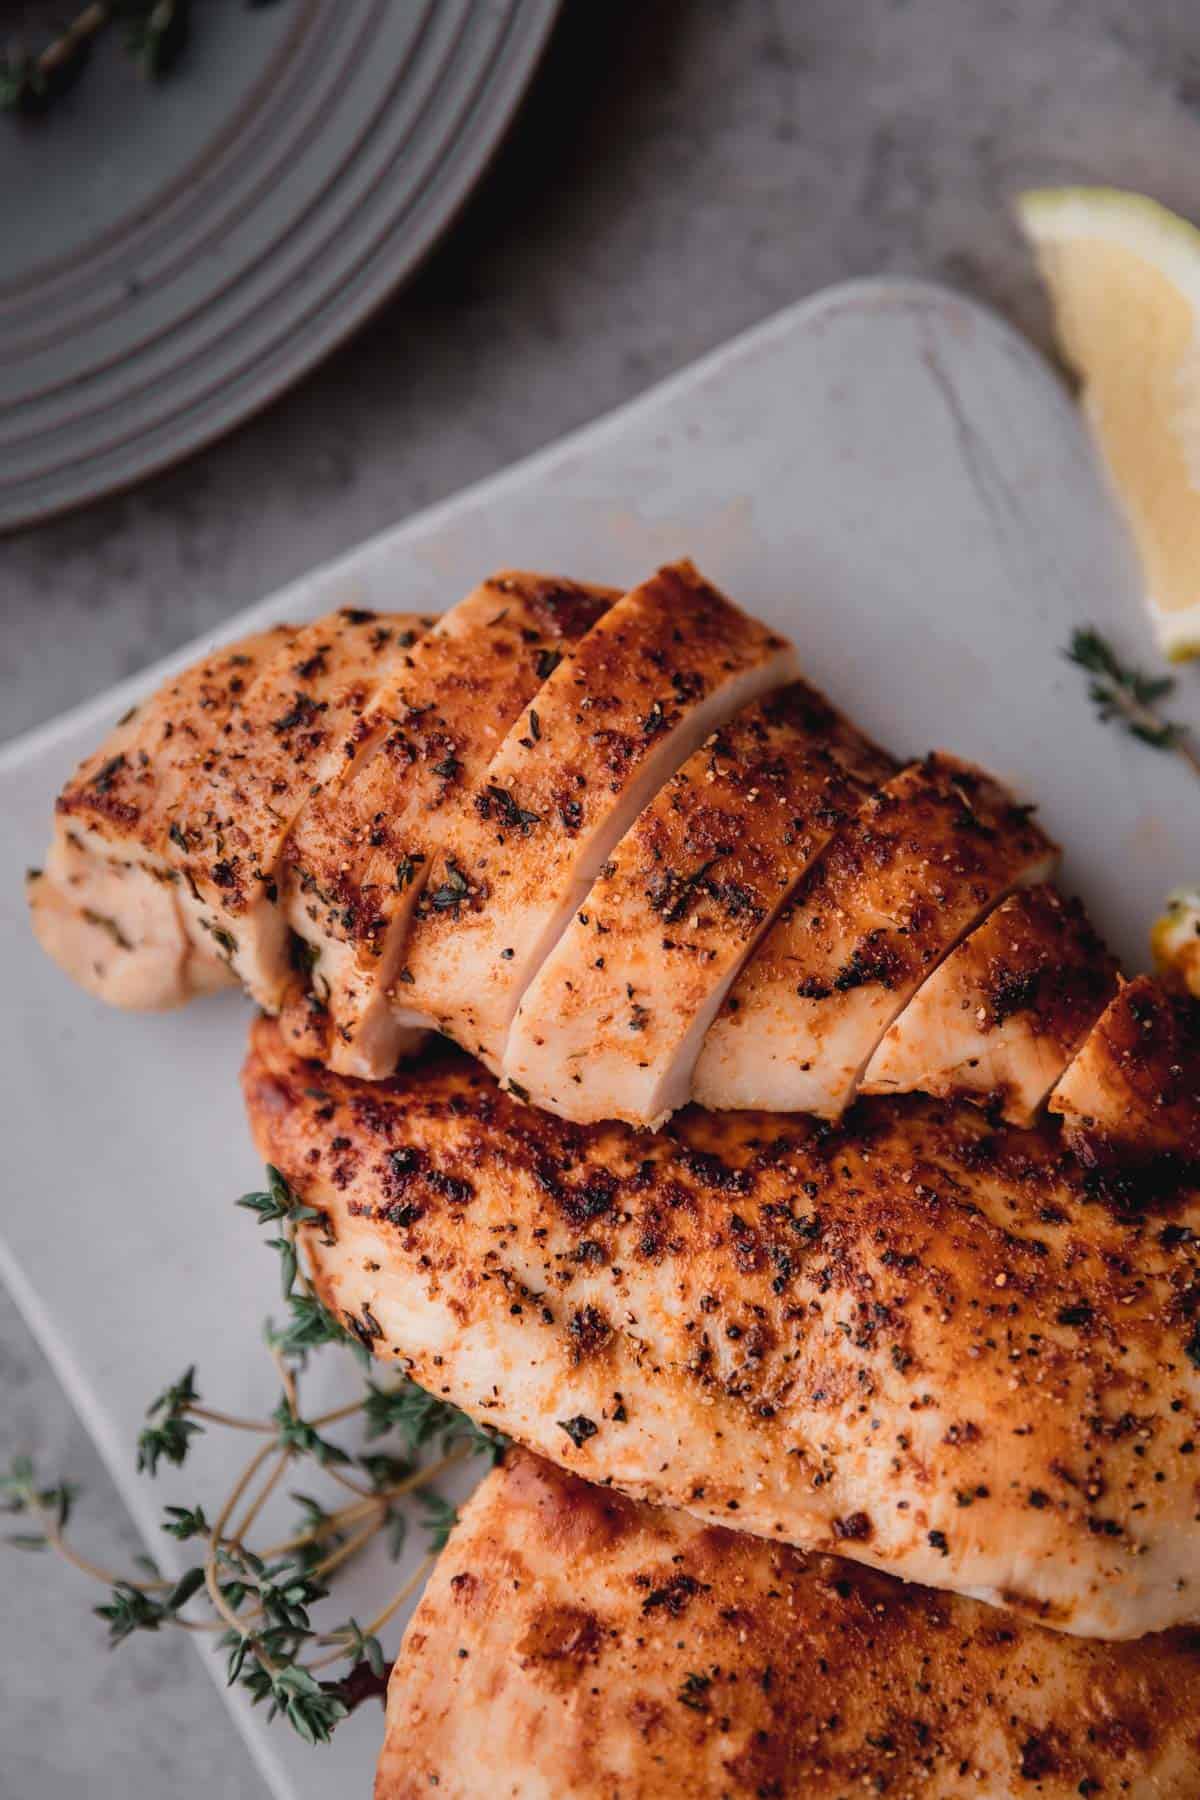 Juicy Air Fryer Chicken Breast sliced on a plate.